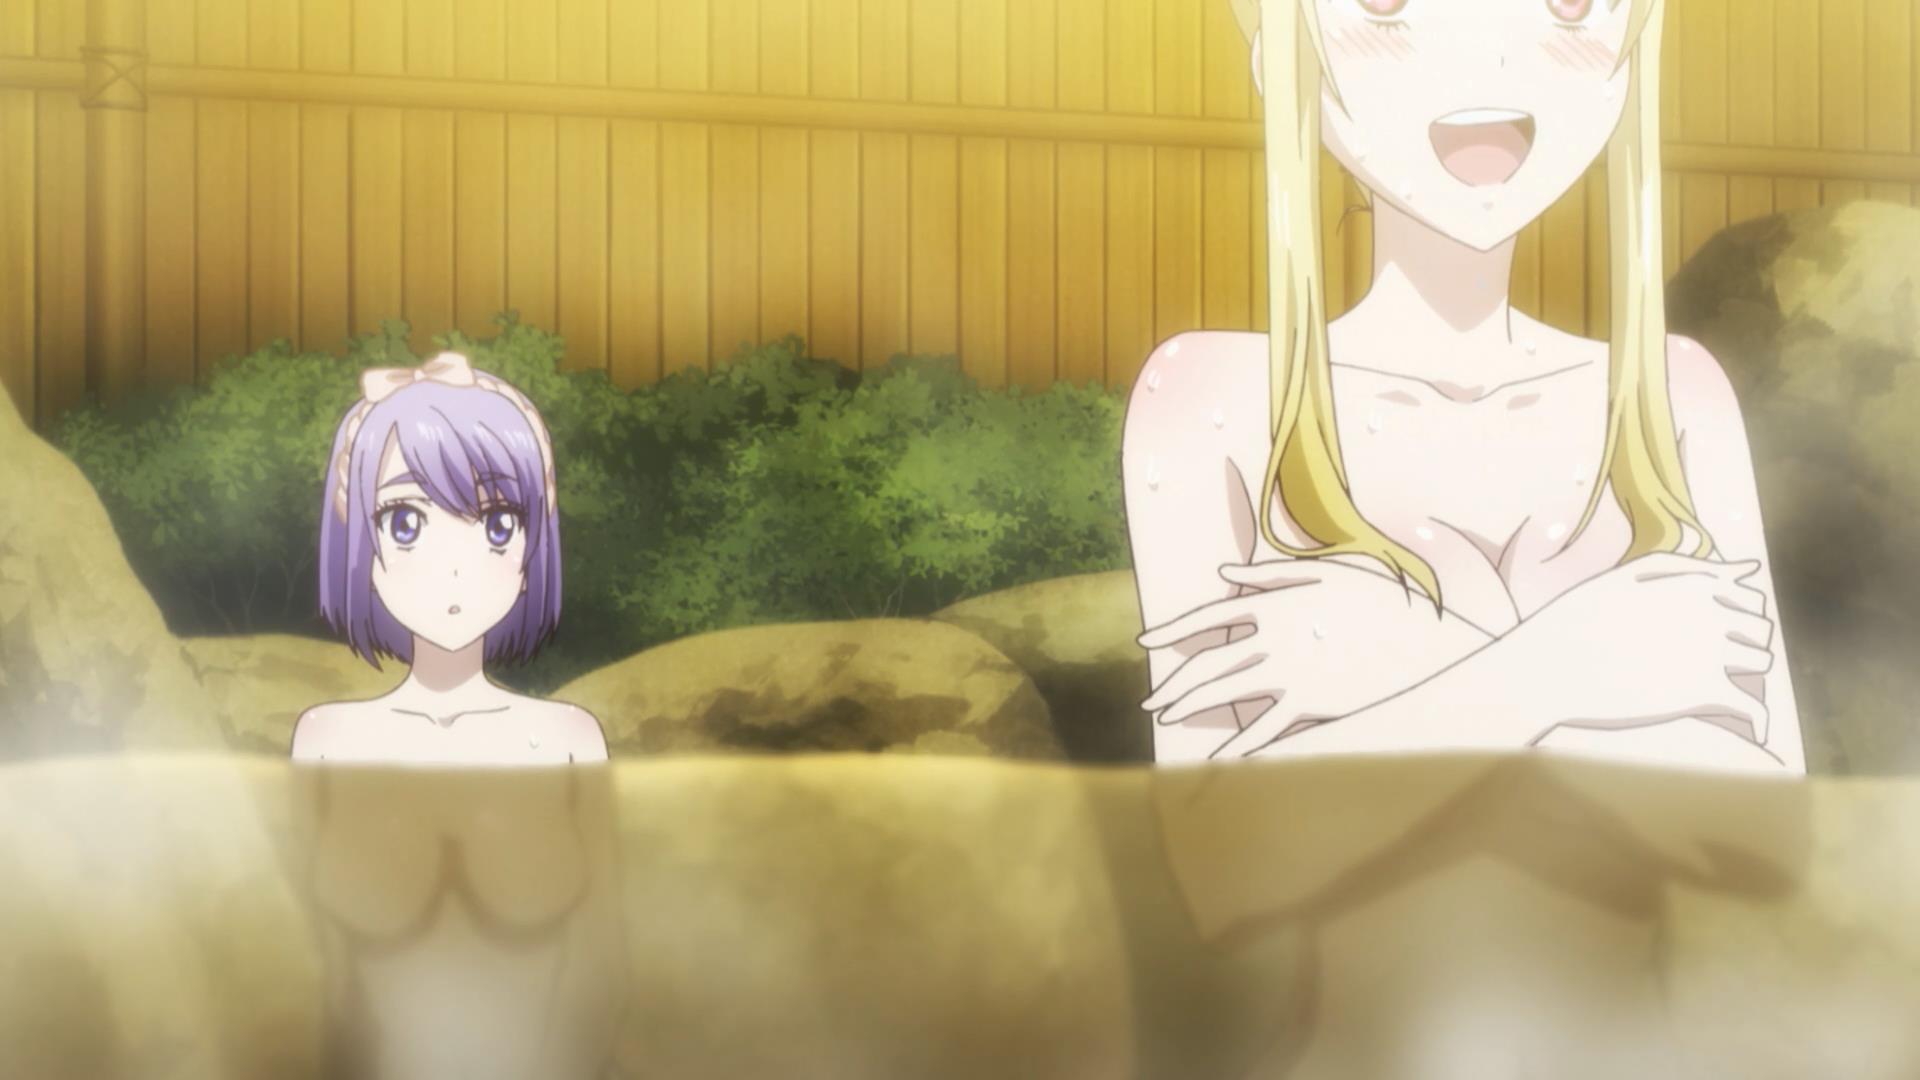 [HorribleSubs] Yamada-kun and the Seven Witches - 06 [1080p].mkv_snapshot_10.49_[2015.05.17_13.48.33]